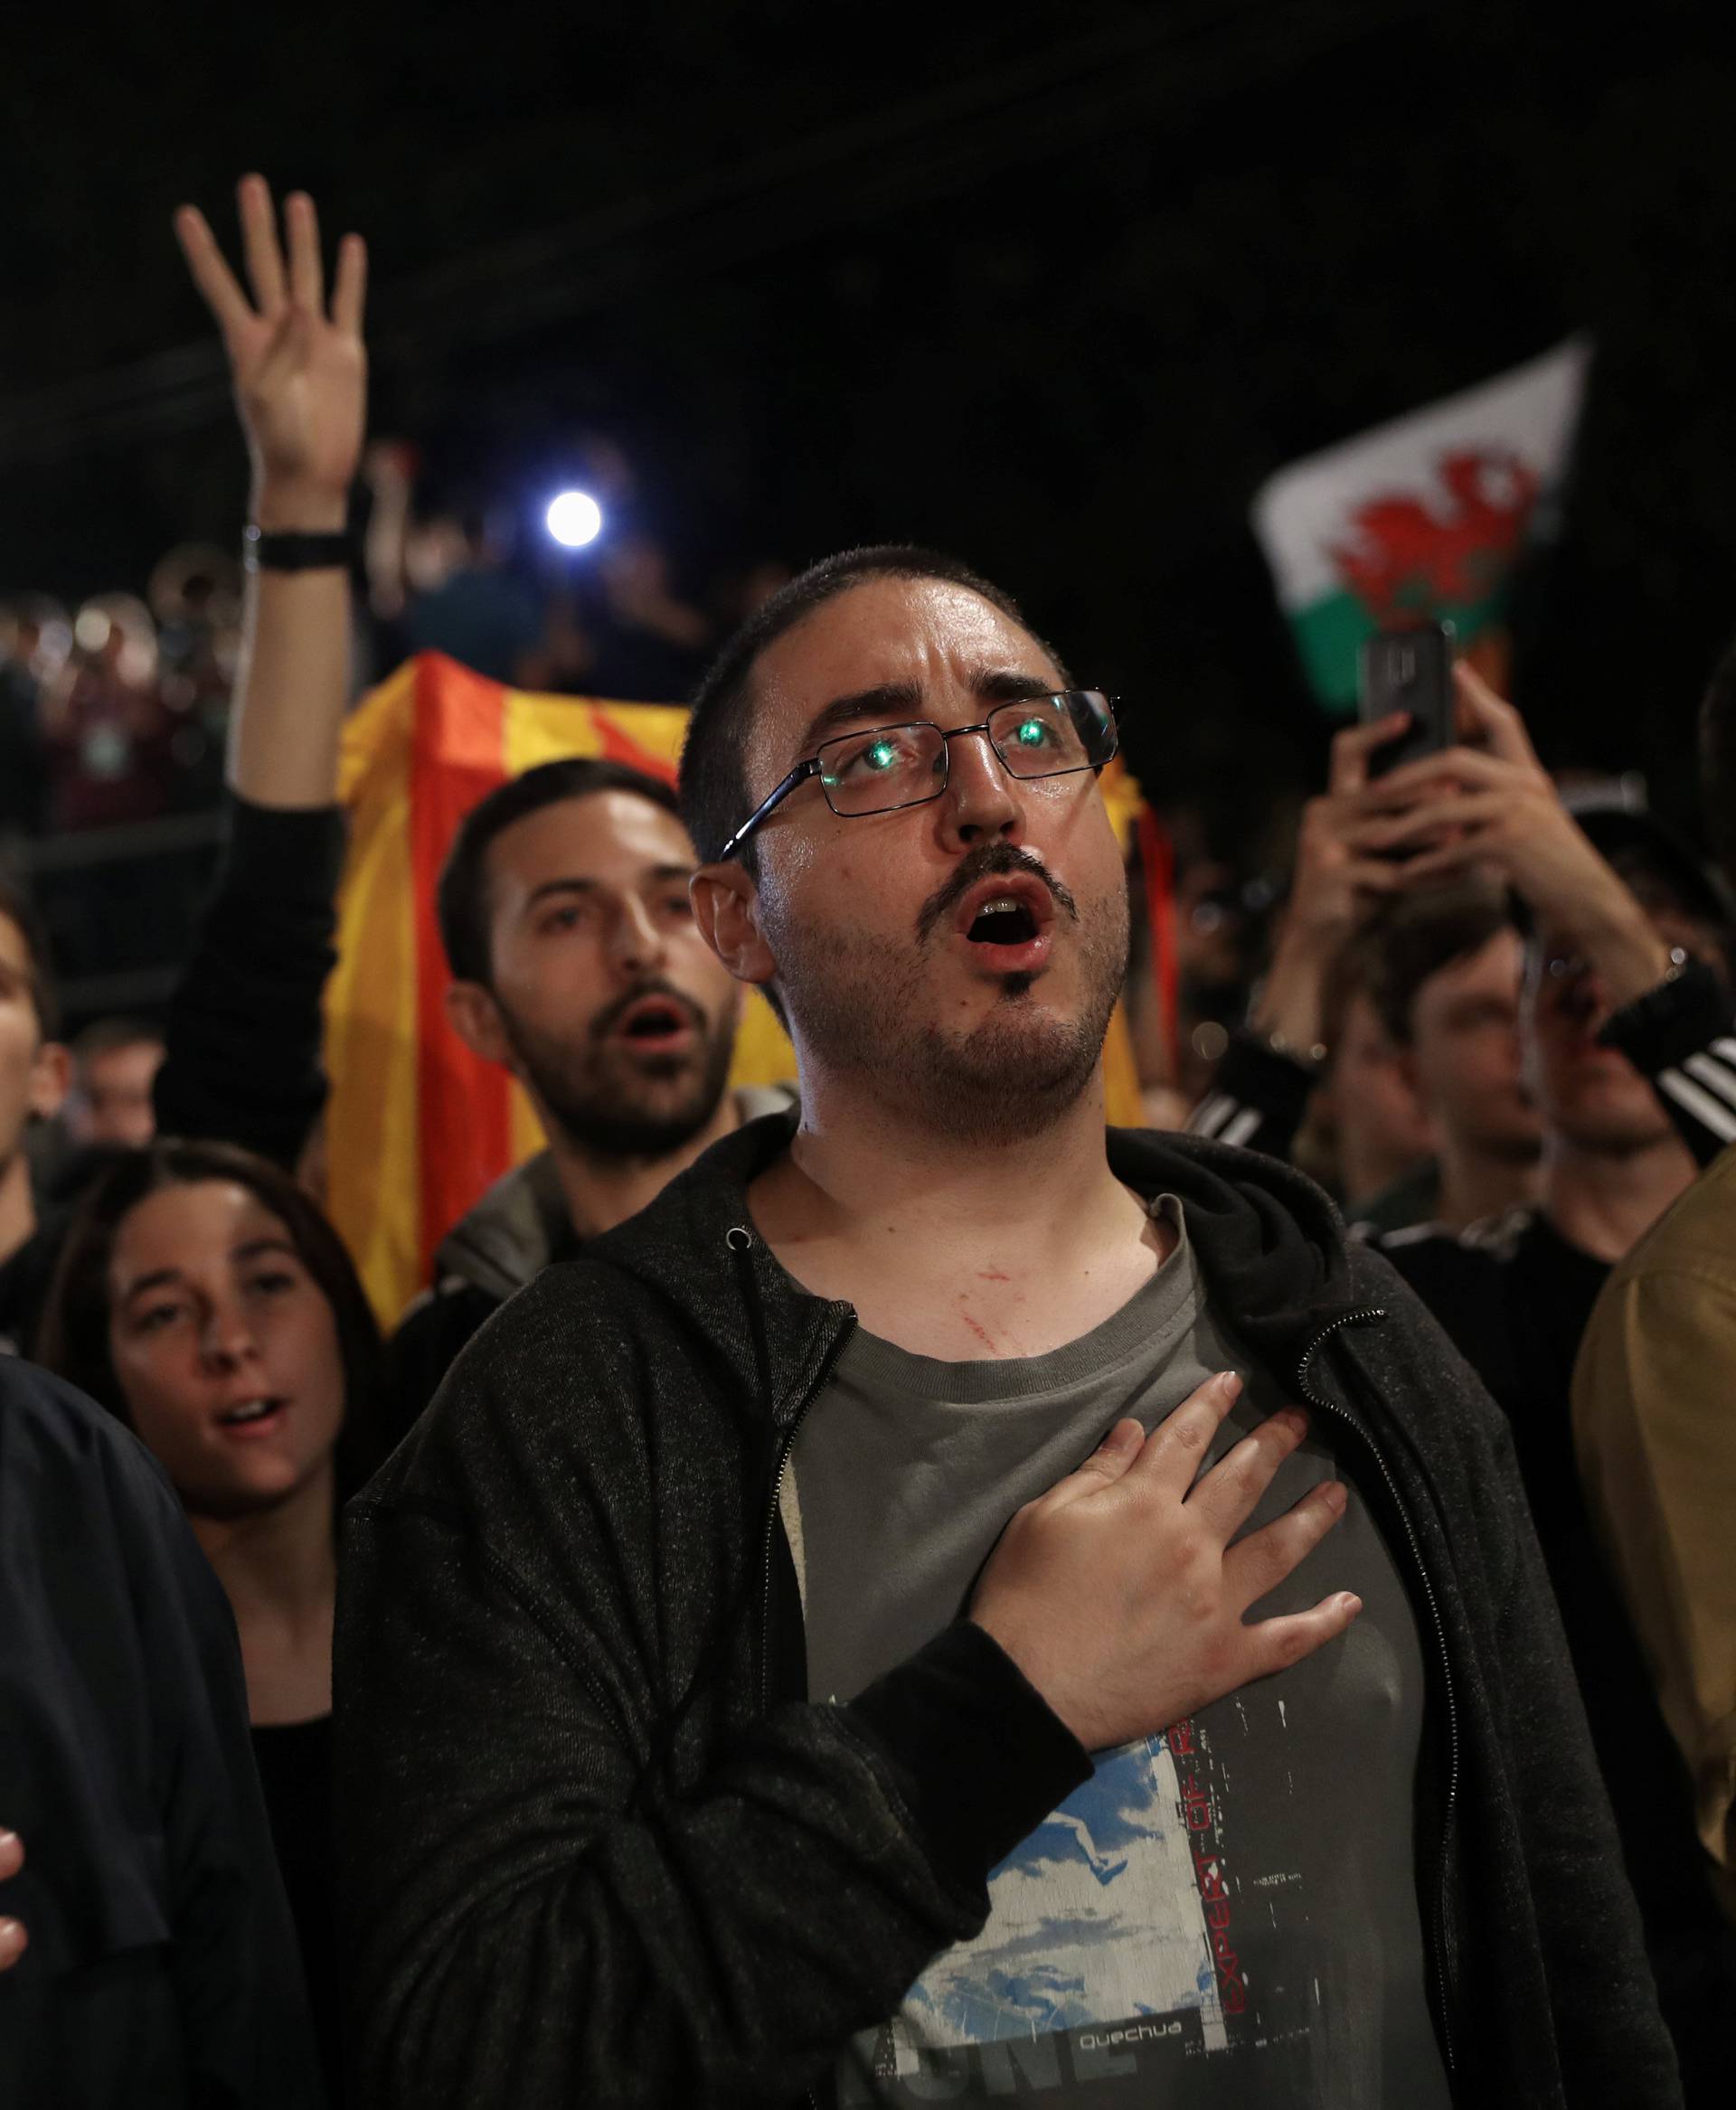 People sing during a gathering at Plaza Catalunya after voting ended for the banned independence referendum, in Barcelona